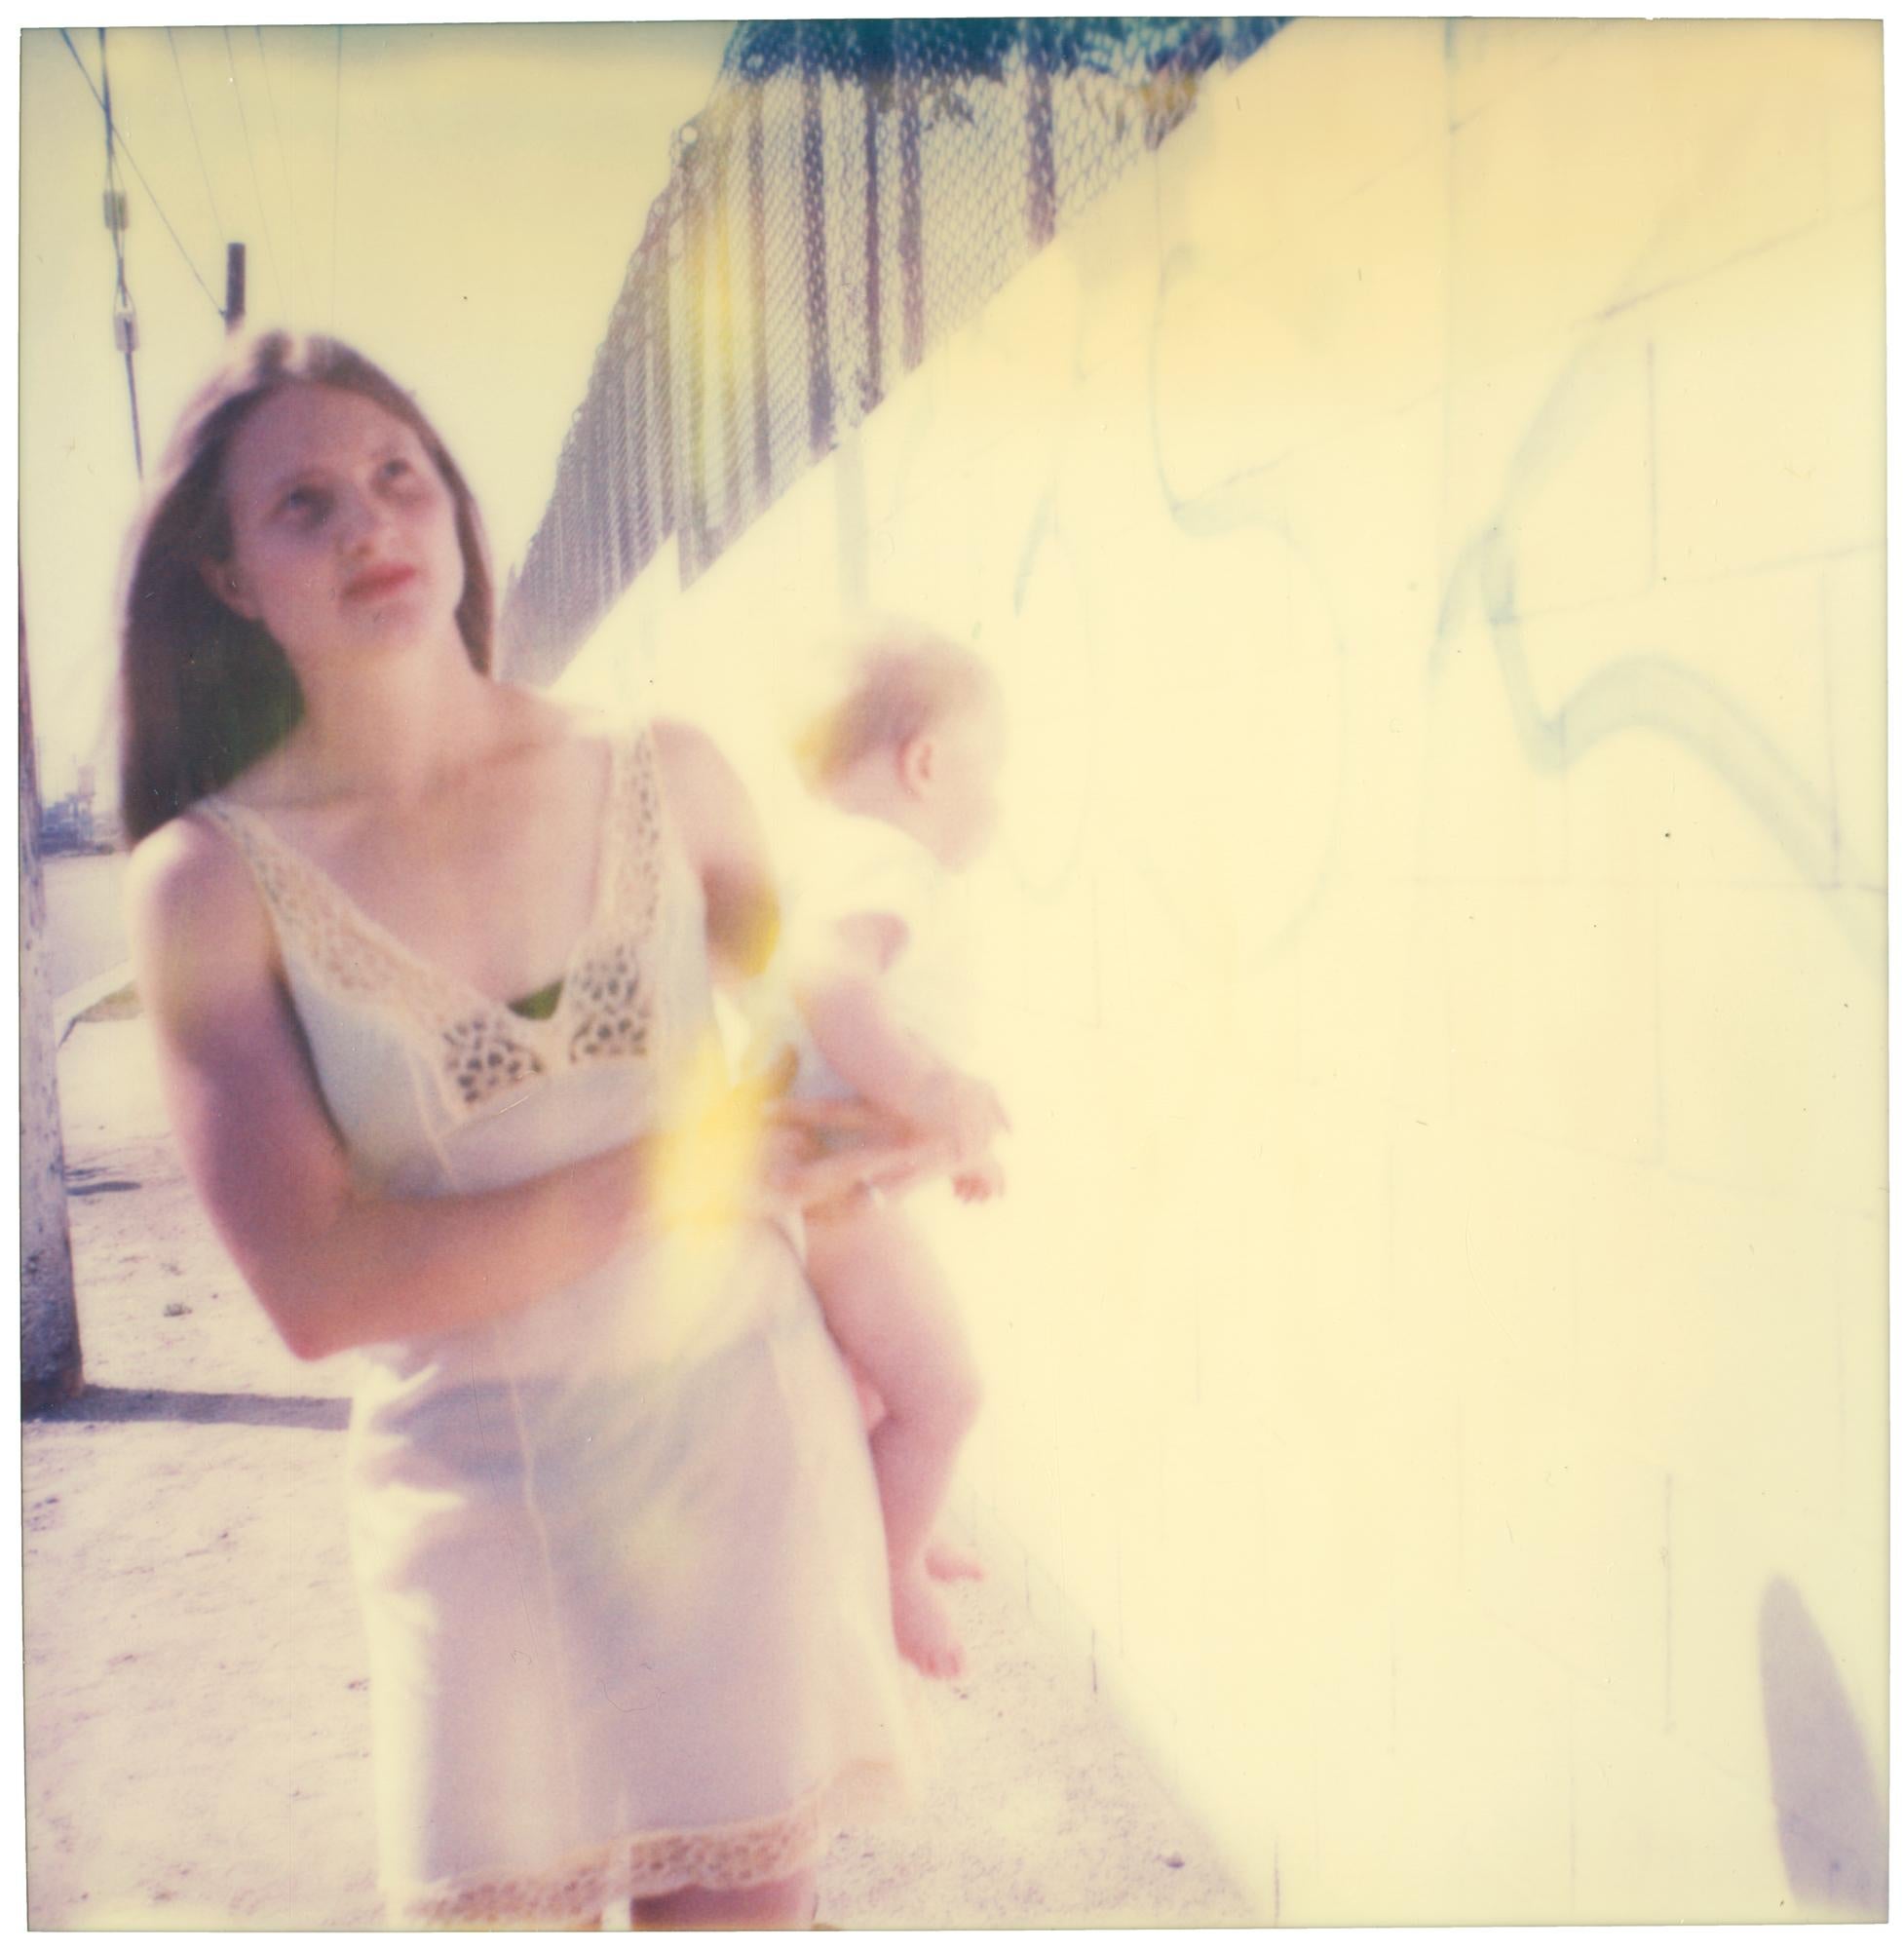 Stefanie Schneider Color Photograph - On Hold (The Last Picture Show) - Contemporary, 21st Century, Polaroid